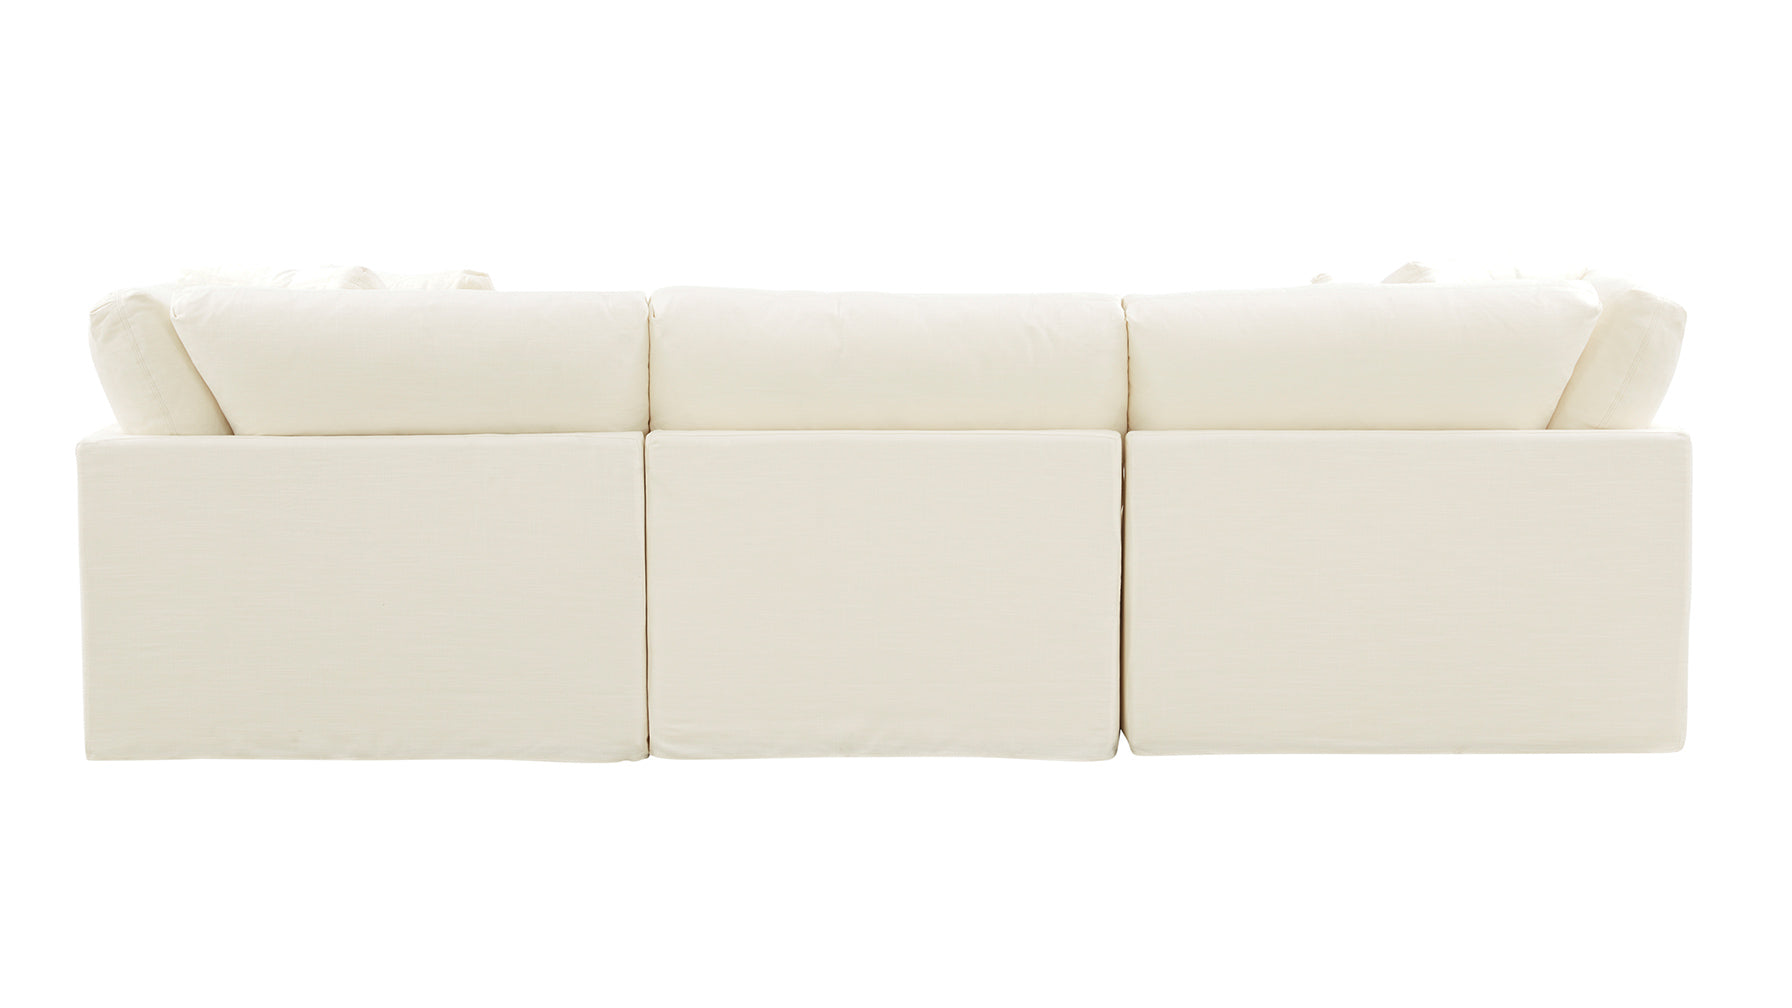 Get Together™ 4-Piece Modular Sectional, Large, Cream Linen - Image 8